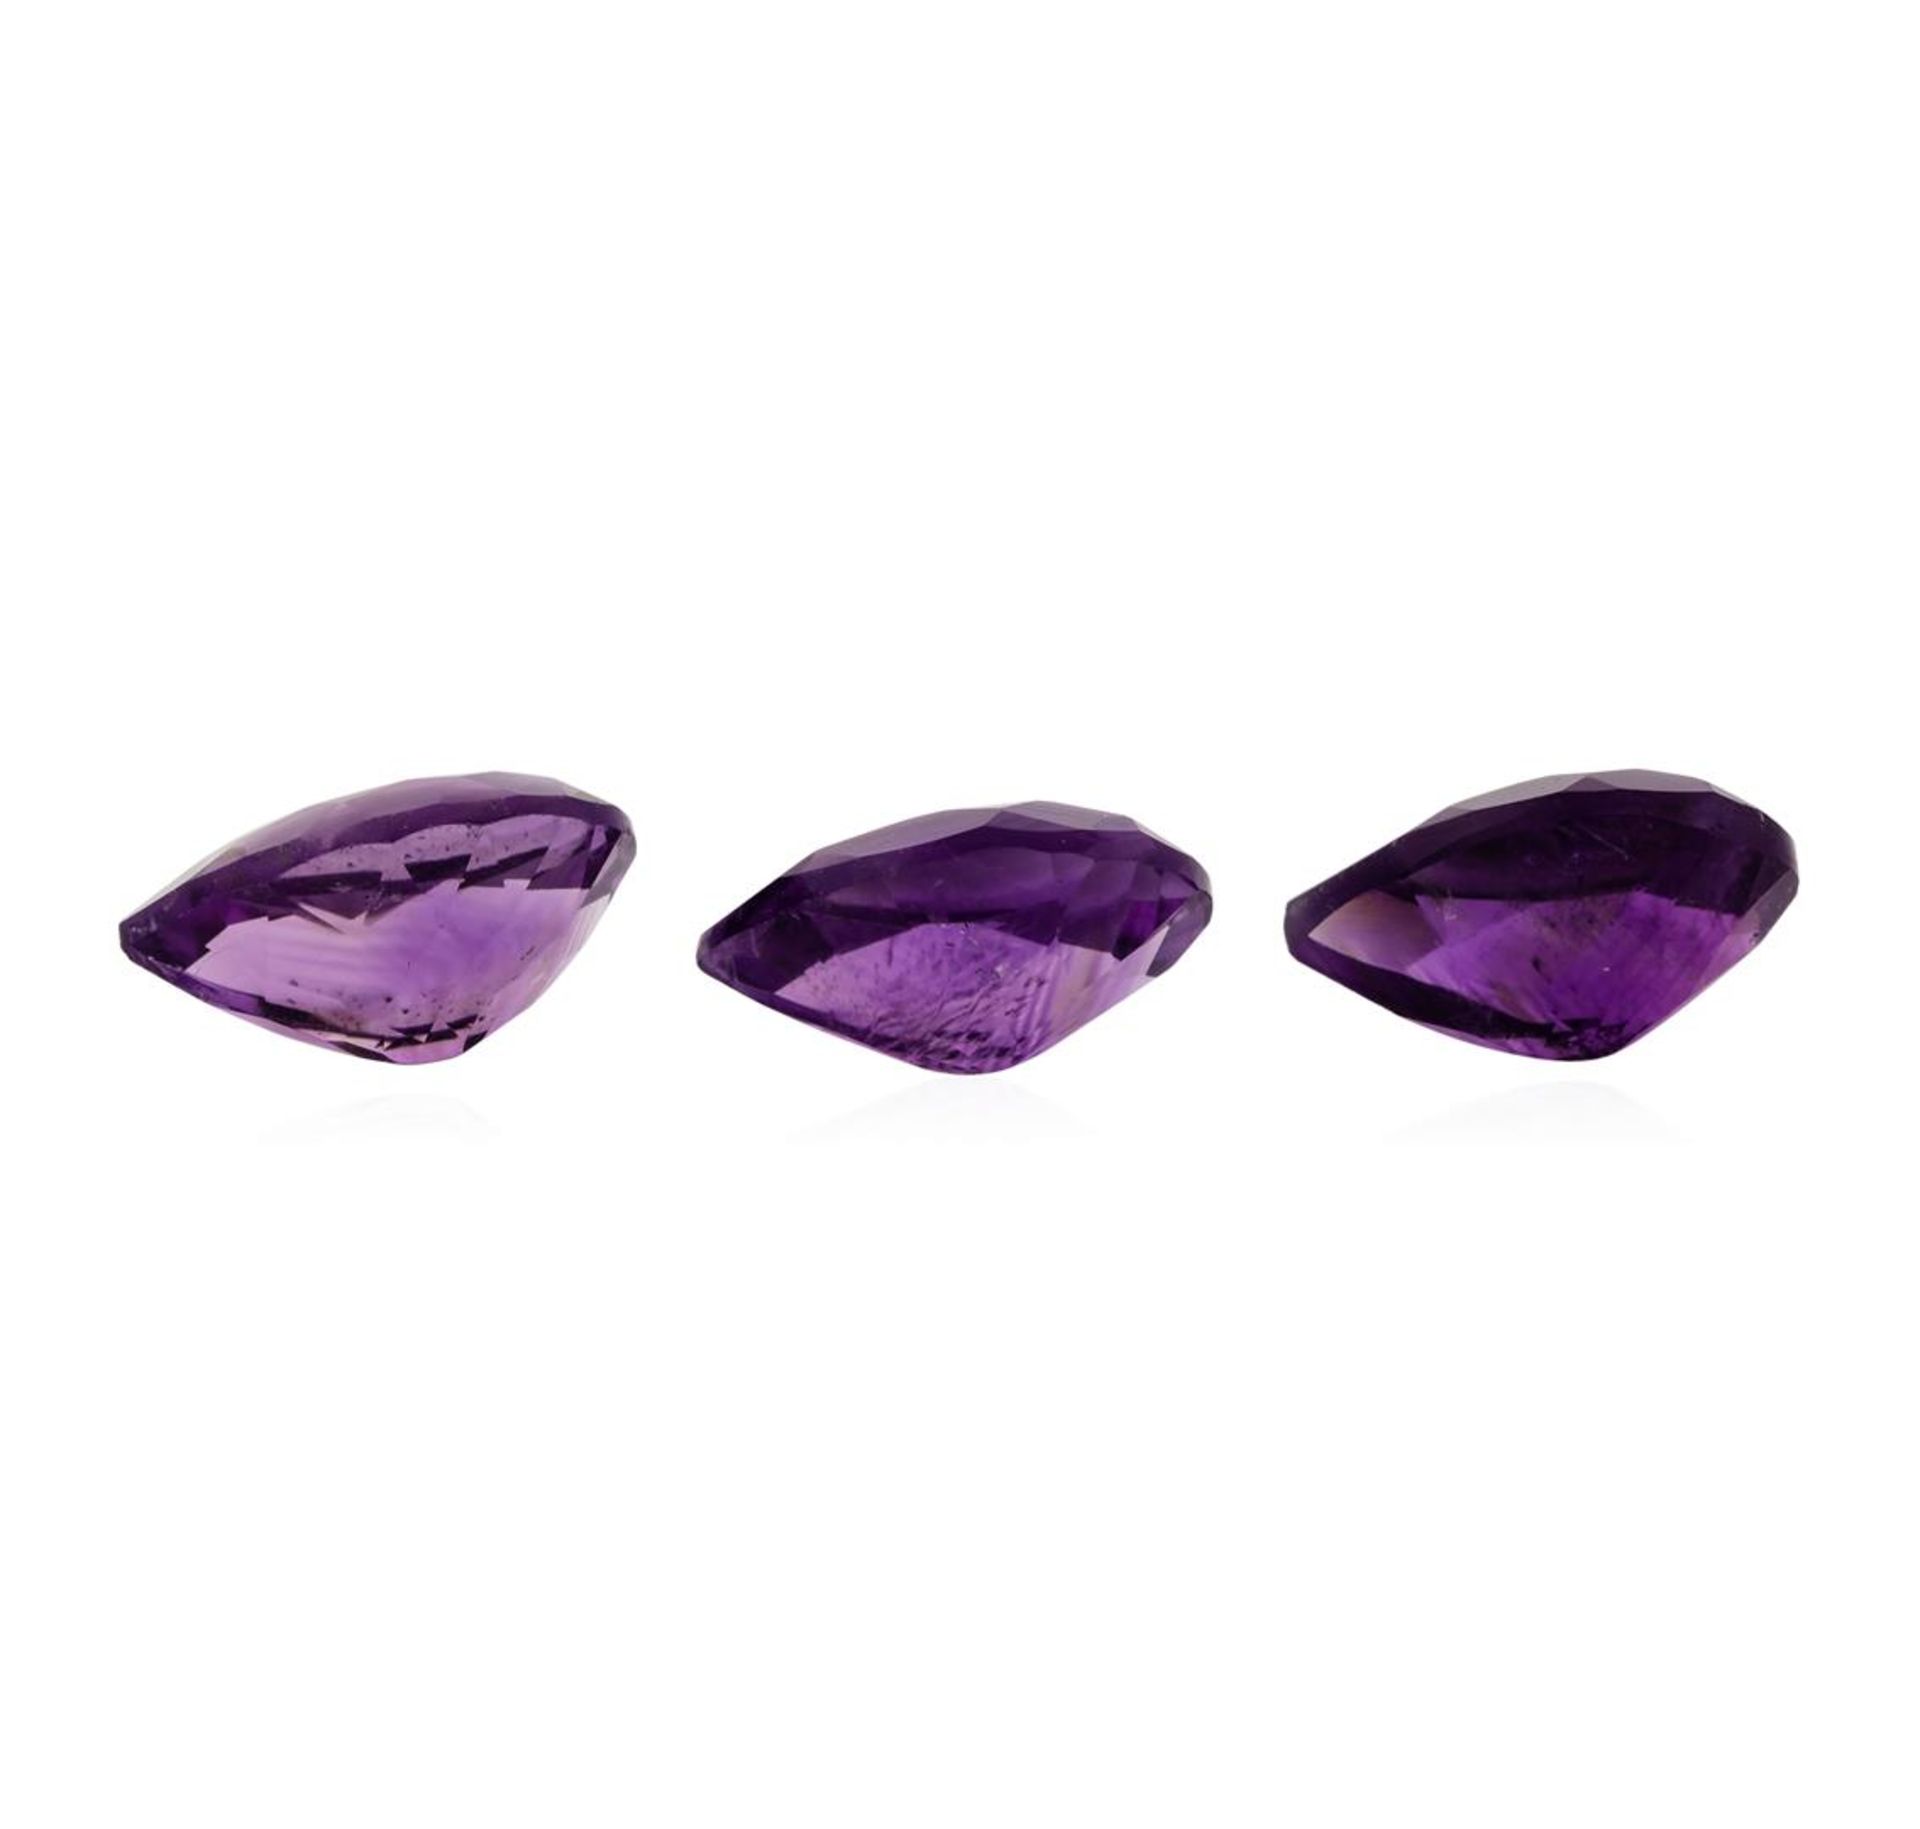 22.82ctw.Natural Pear Cut Amethyst Parcel of Three - Image 2 of 3